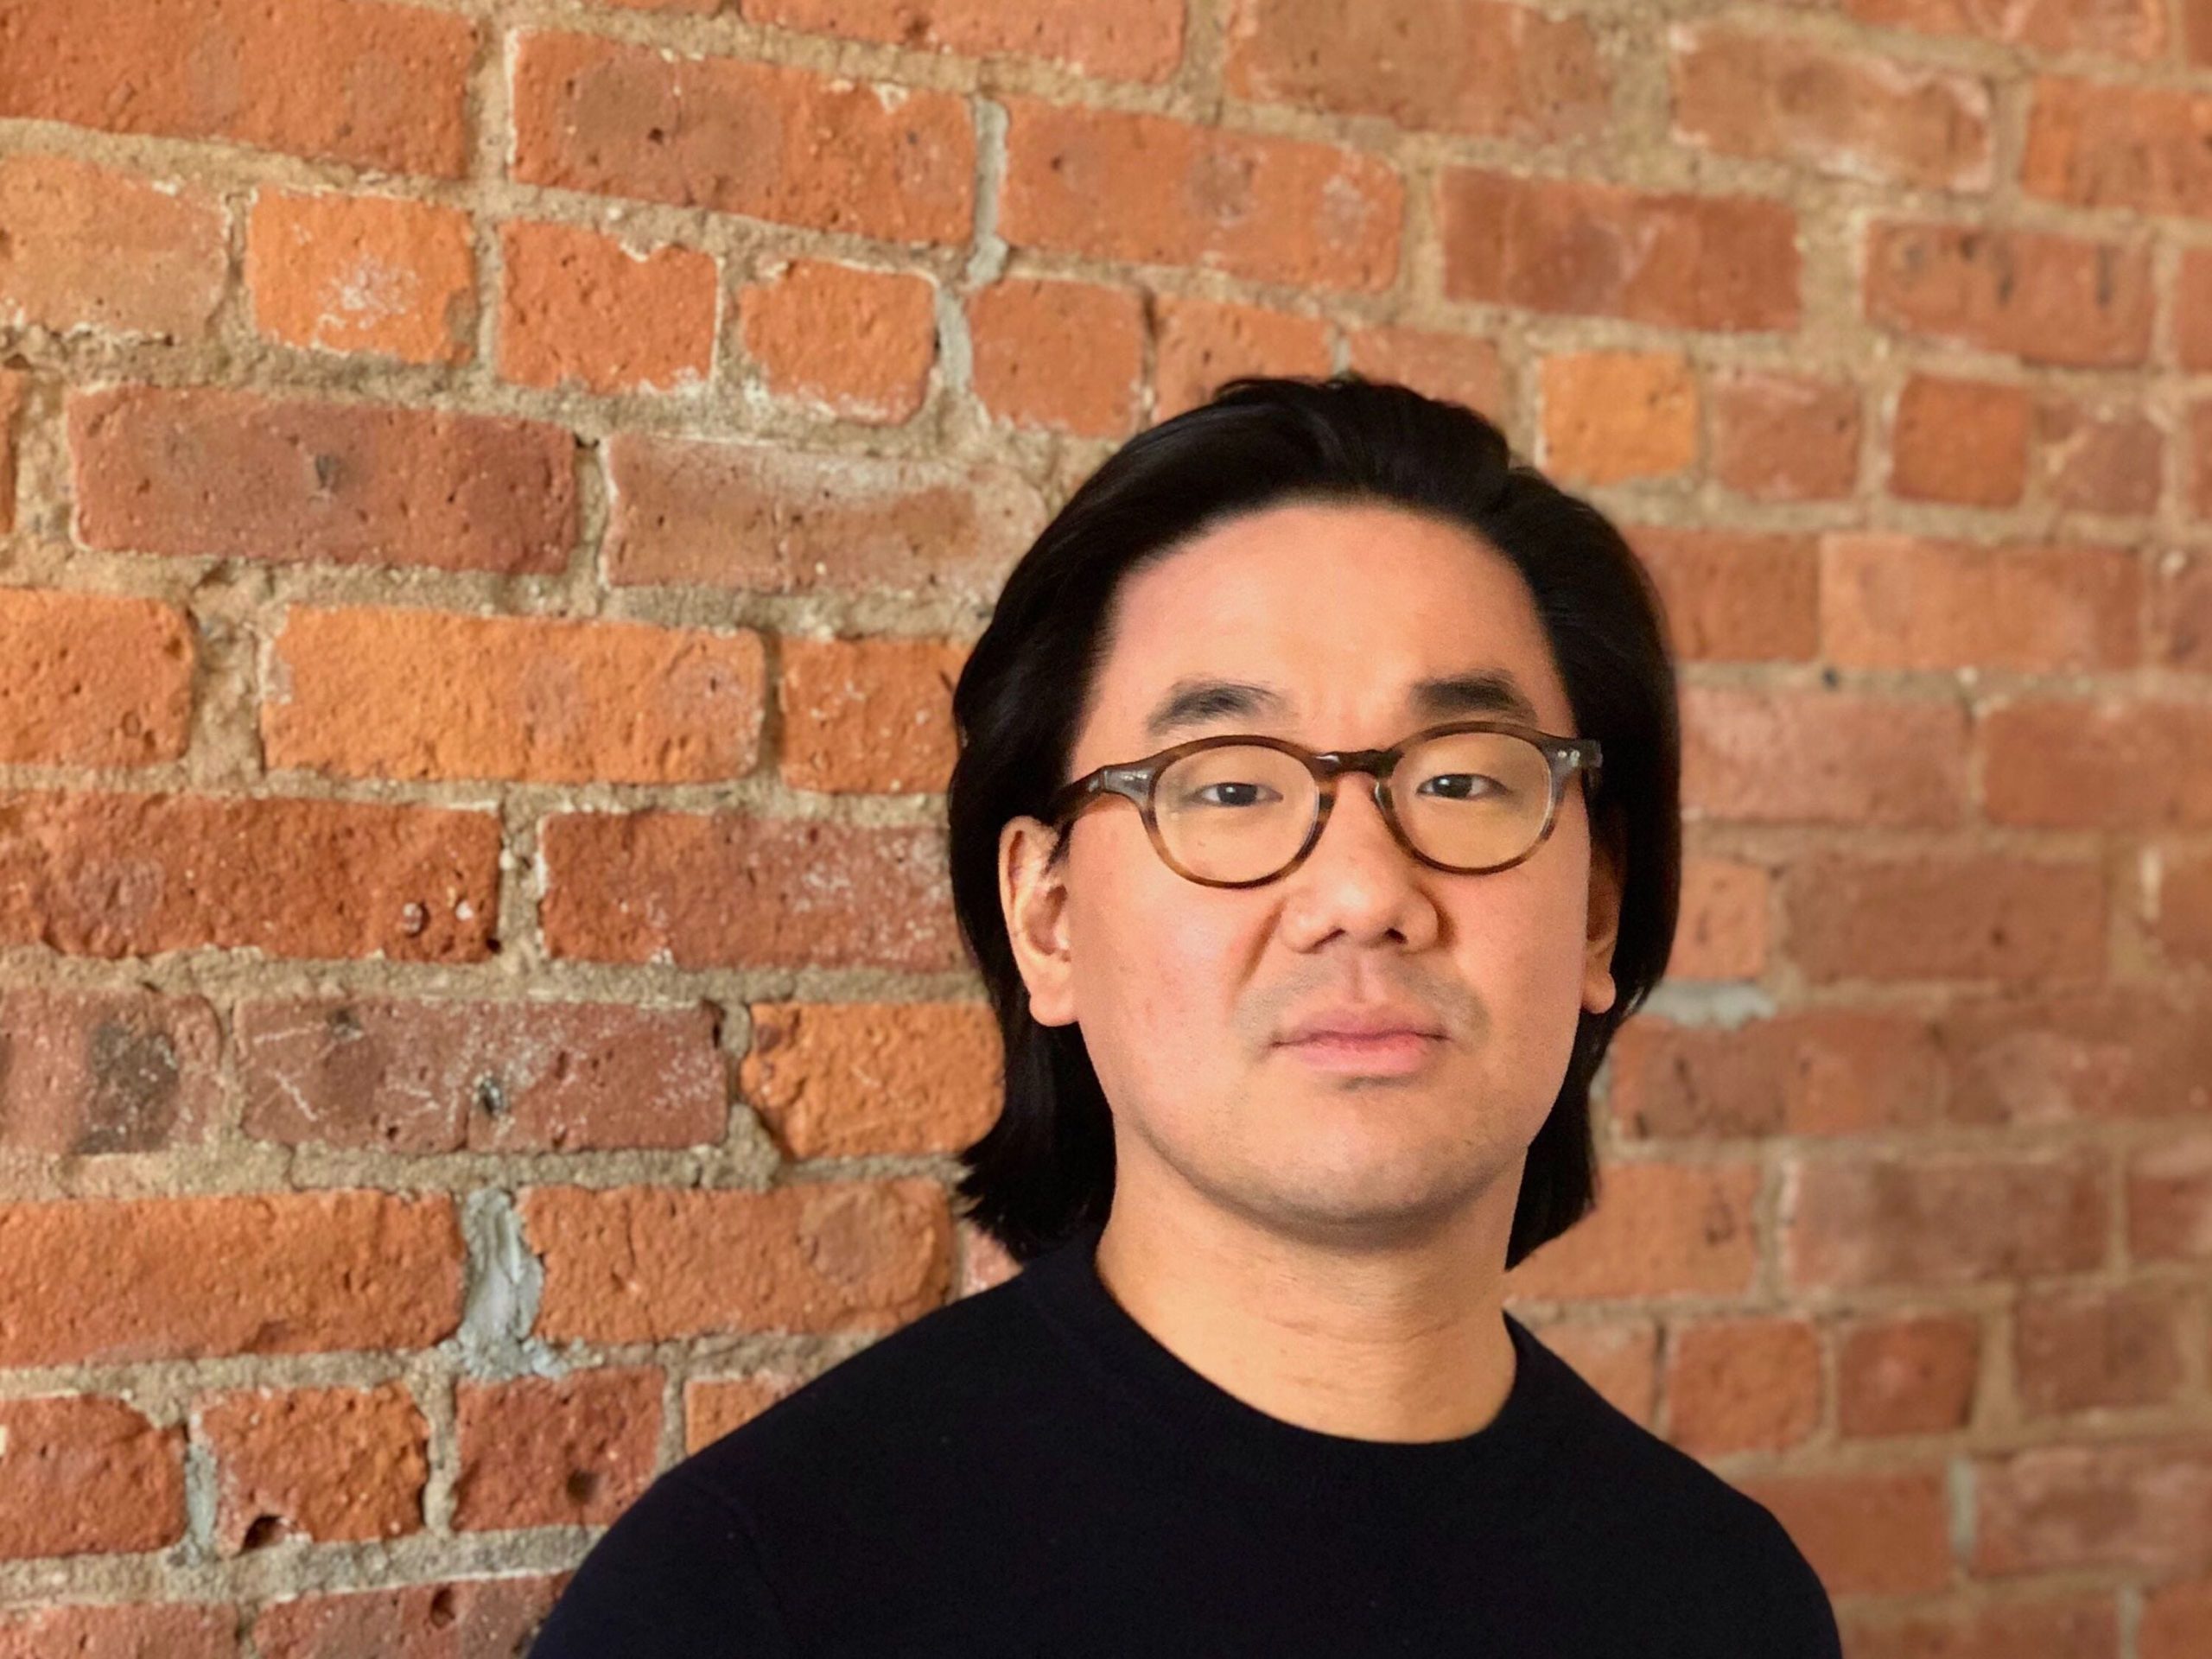 Eddie Kim, founder and CEO of Memo